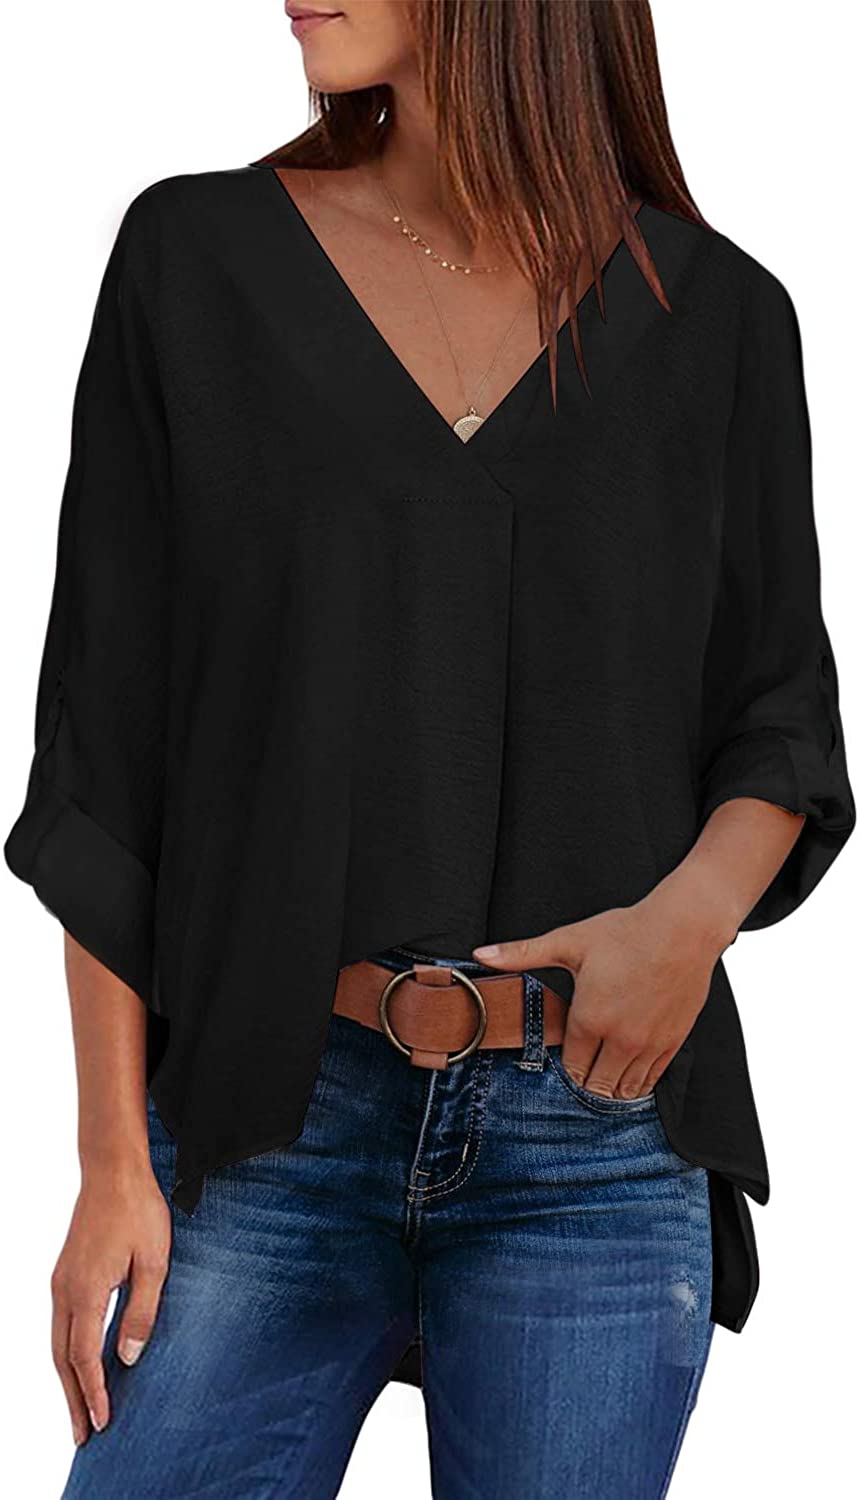 Astylish Women Casual Solid Cuffed Tab Sleeve High Low V Neck Blouse Tops